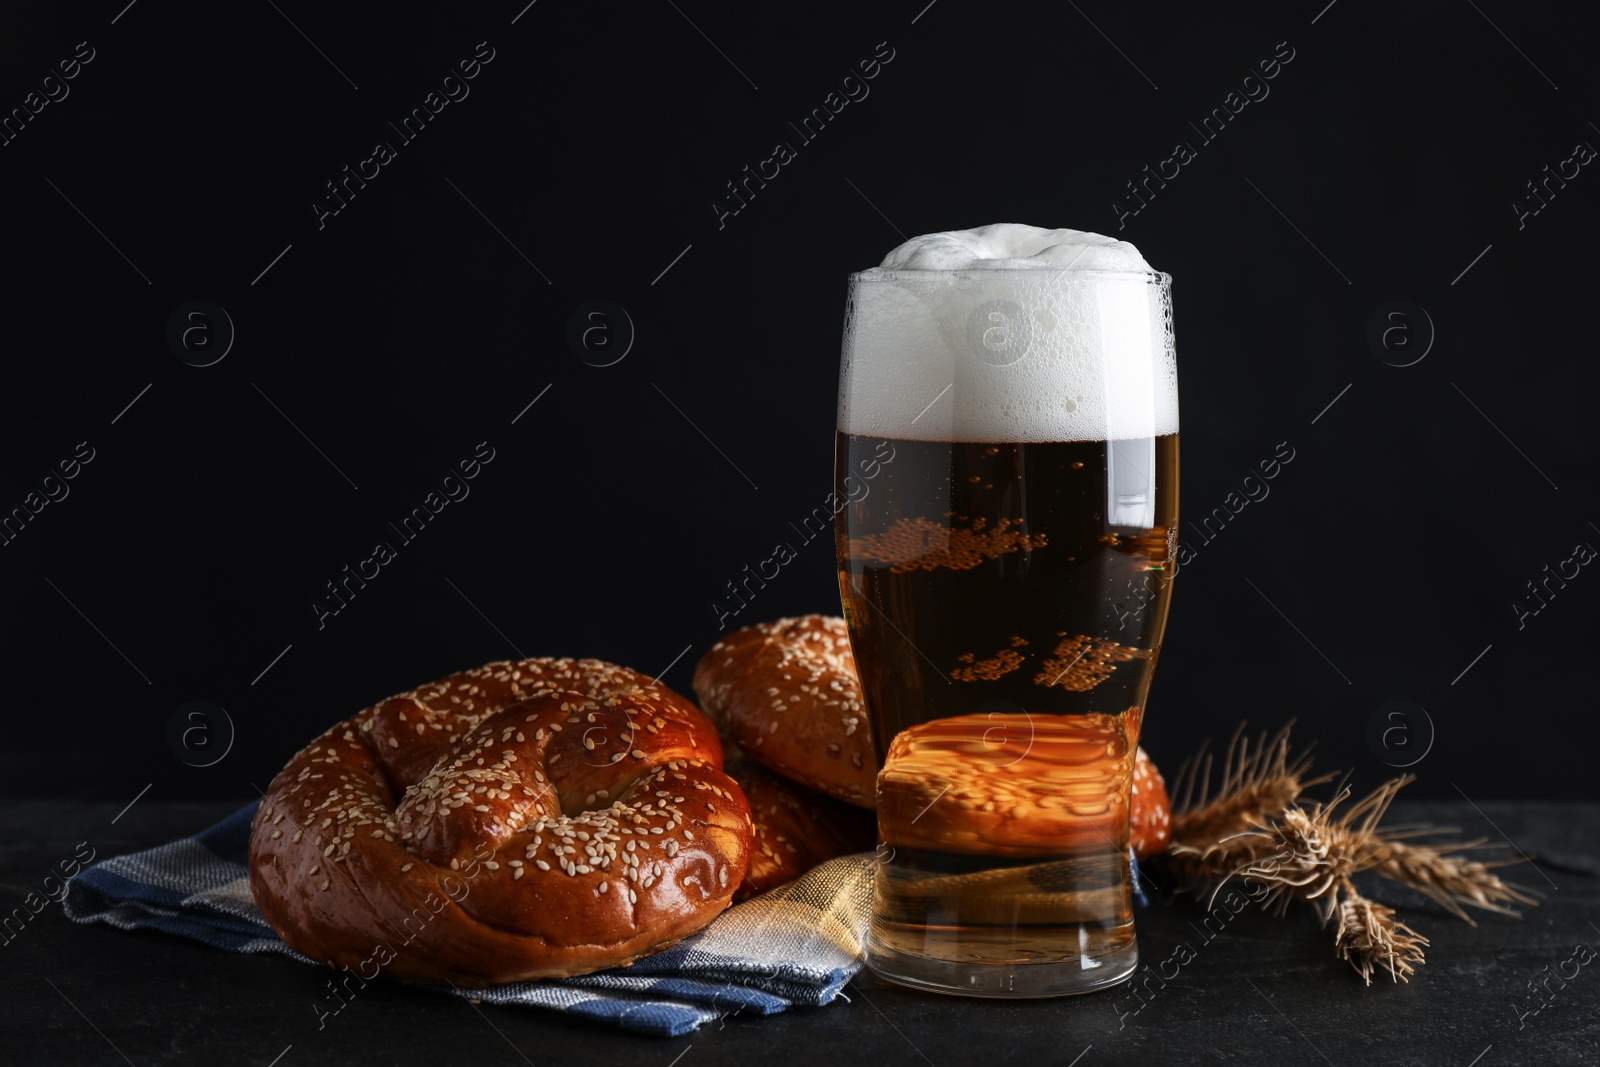 Photo of Tasty pretzels, glass of beer and wheat spikes on black table against dark background